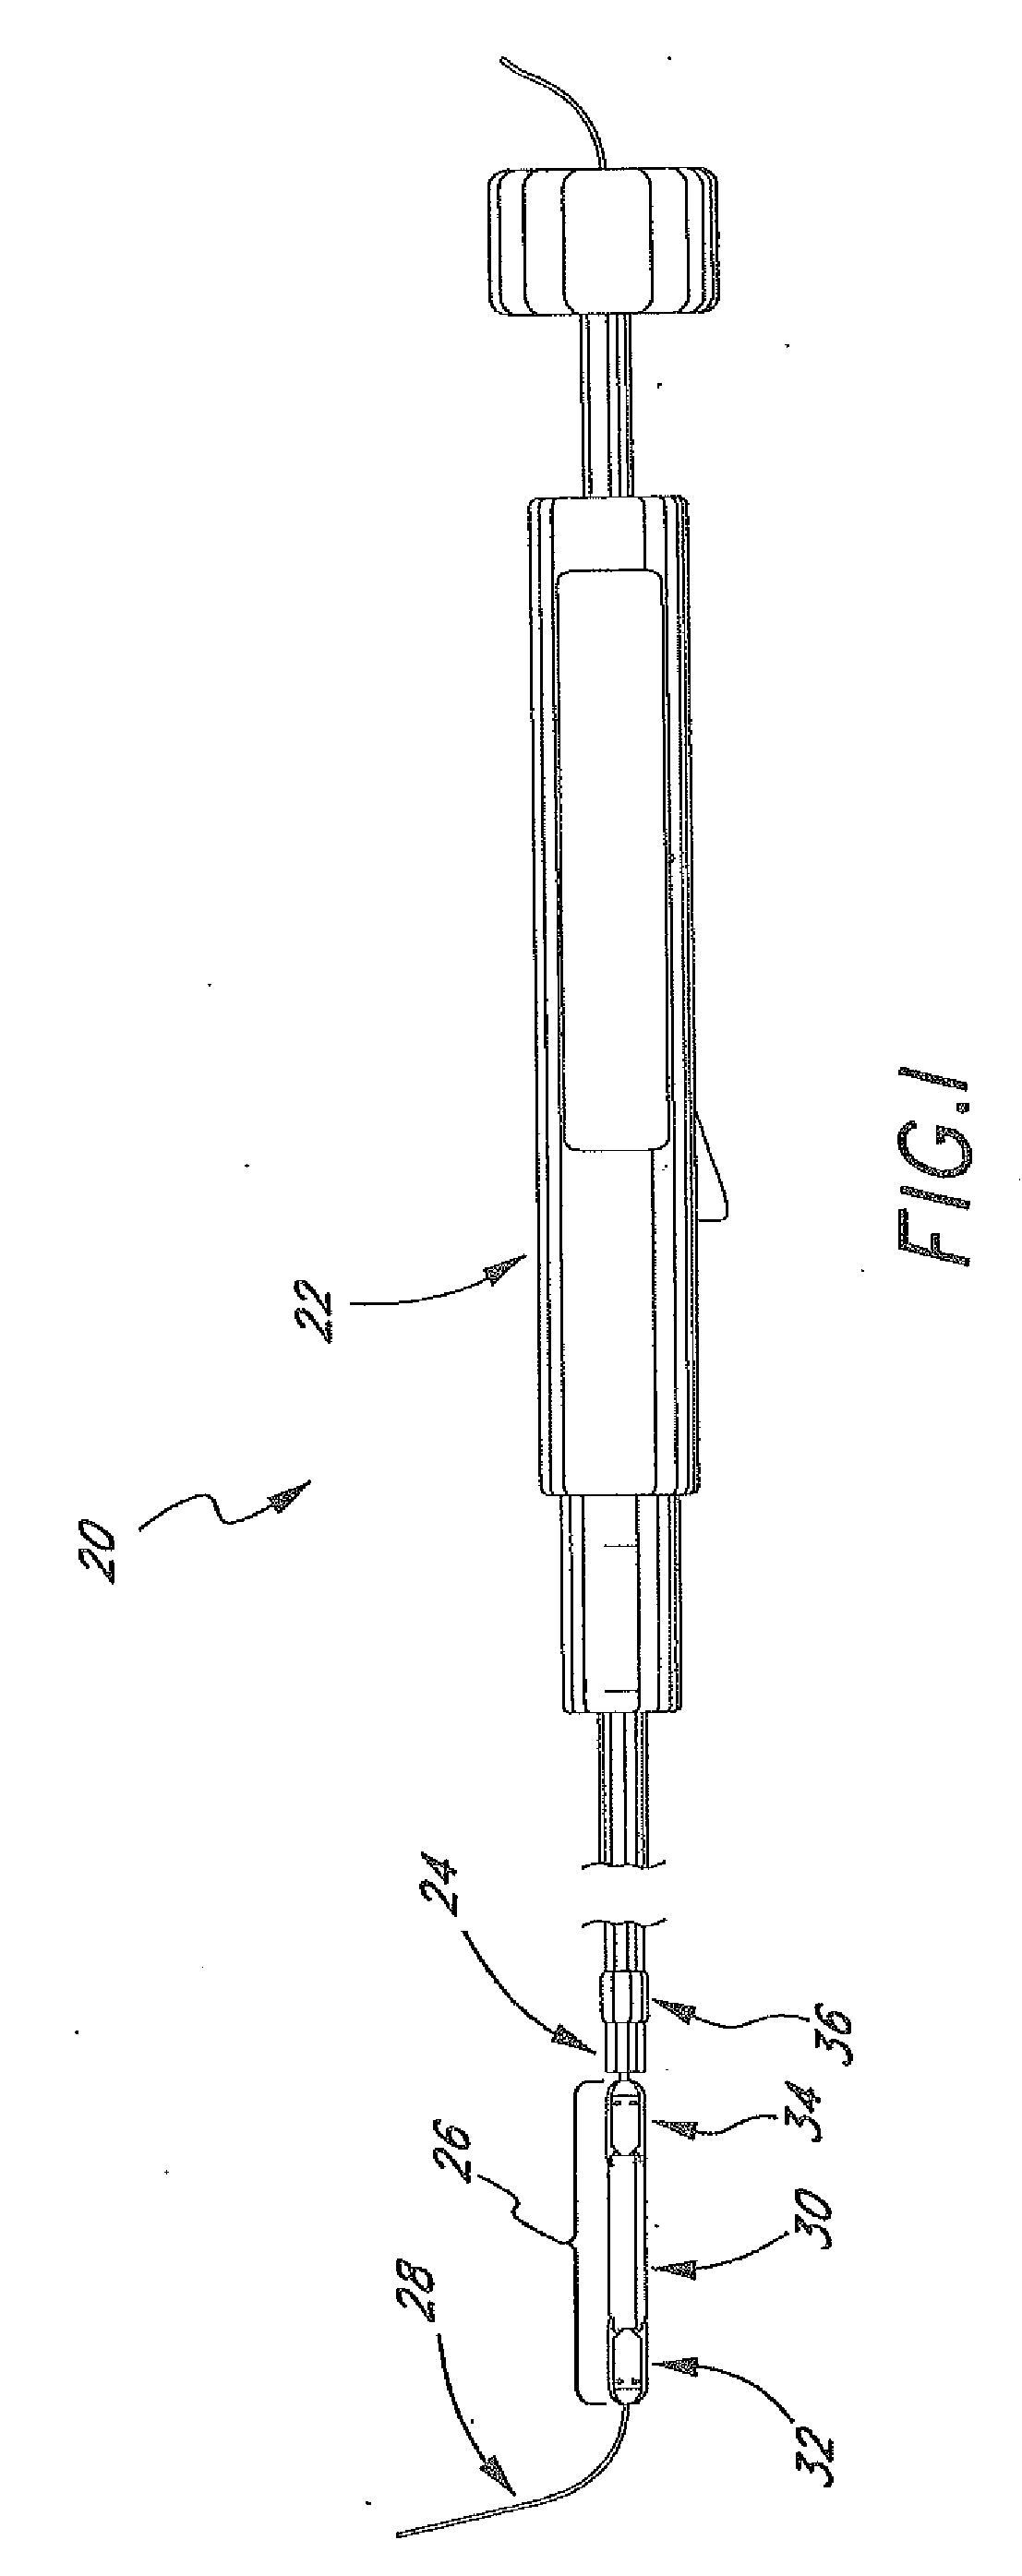 Method and Apparatuses for Deploying Minimally-Invasive Heart Valves